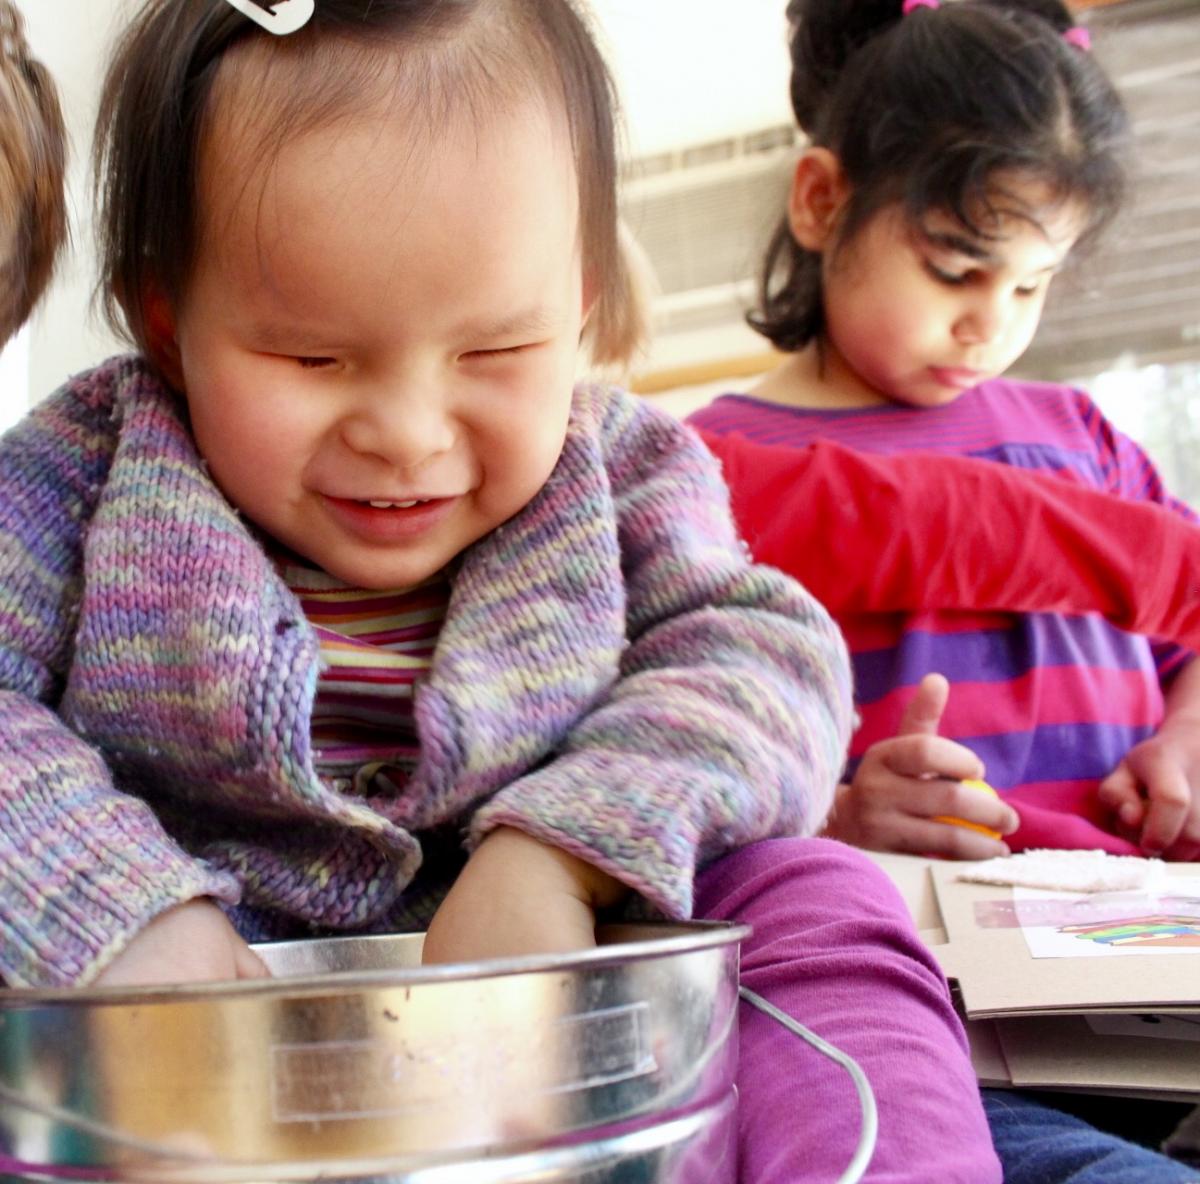 Young girl playing with items in metal bucket